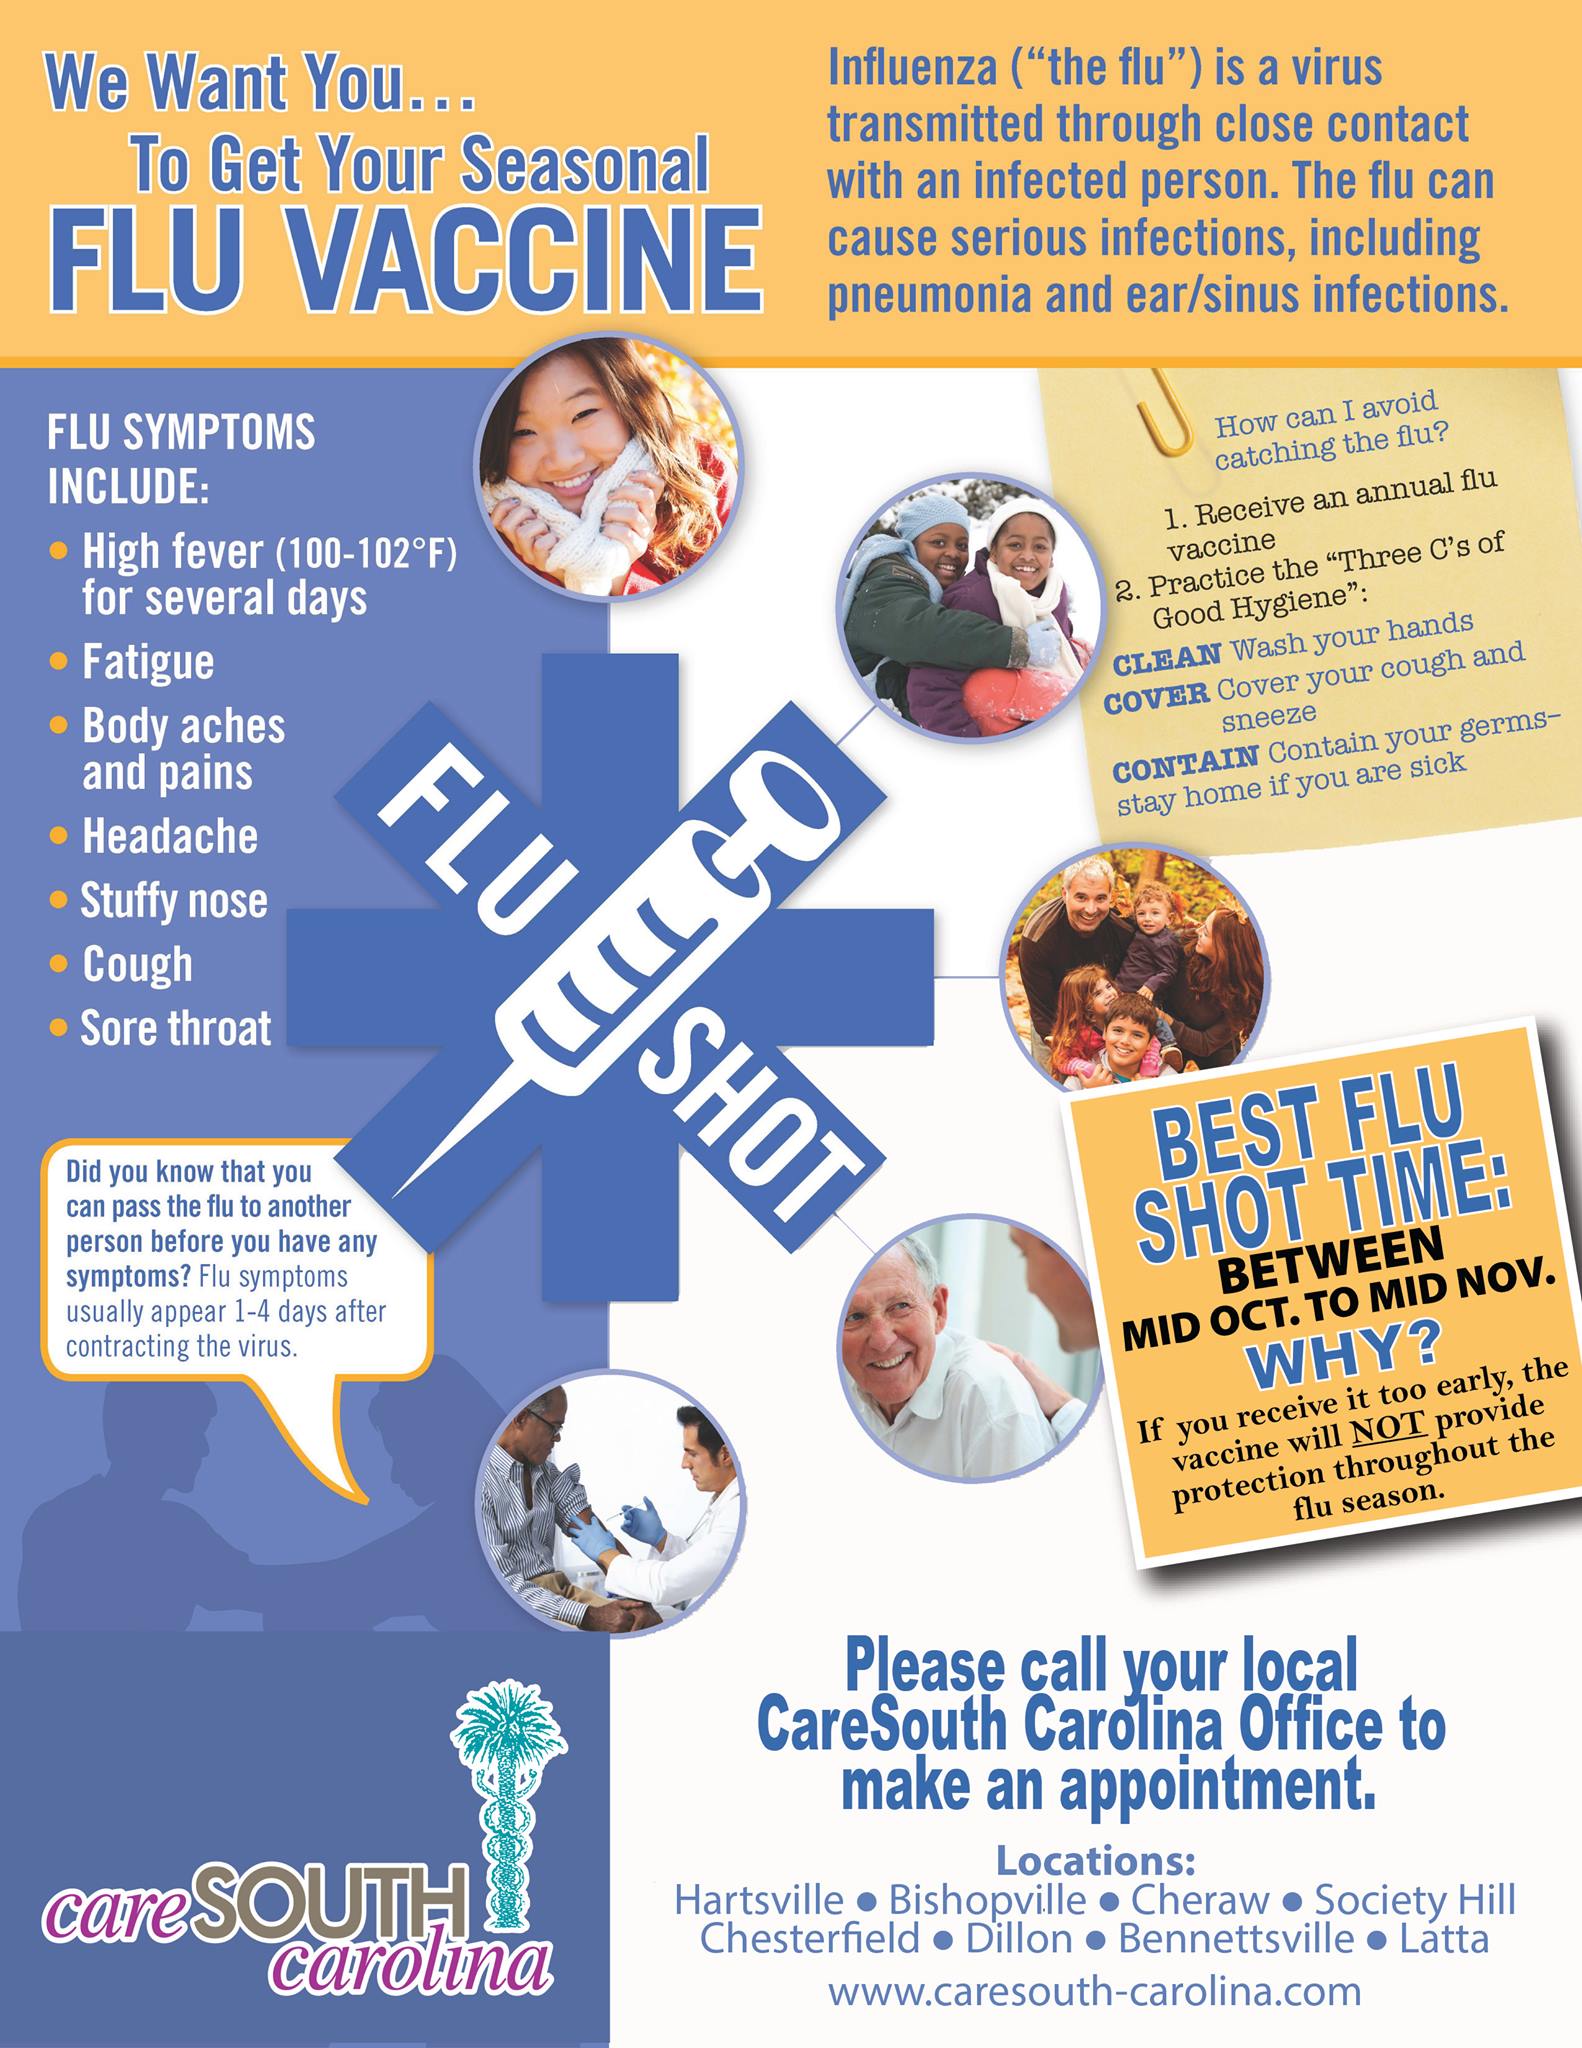 The importance of a Flu Shot amidst the COVID-19 pandemic